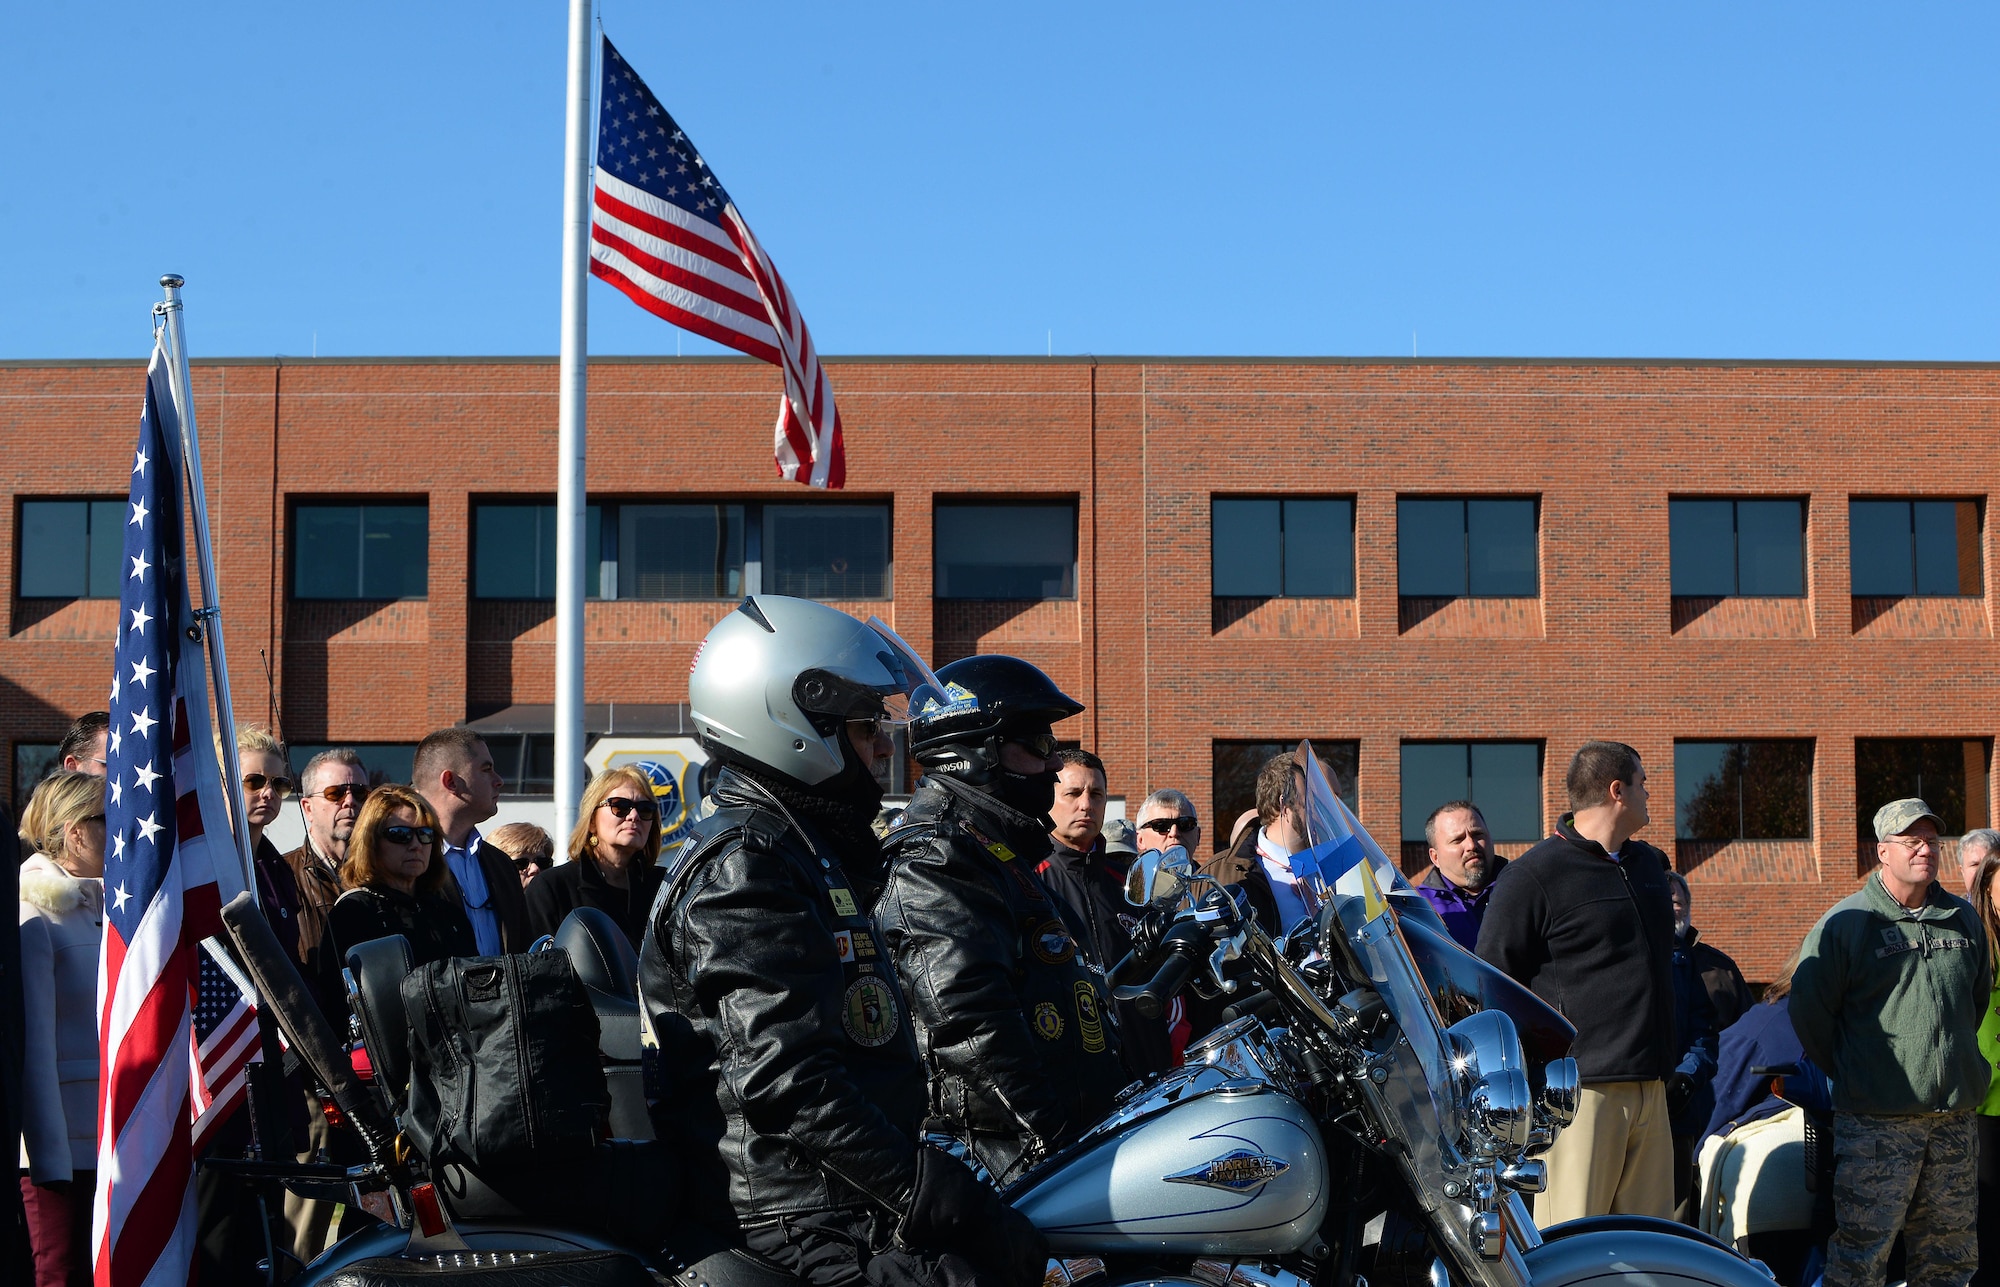 Patriot Guard riders prepare to escort the procession for Pfc. Tyler R. Iubelt, Scott Air Force Base, Illinois, Nov. 21, 2016. Iubelt died Nov. 12 as a result of injuries sustained from an improvised explosive device in Bagram, Afghanistan. His remains transited through Scott AFB with his family, where Scott personnel were able to pay their final respects to the 20-year-old native of Tamaroa, Illinois. He was assigned to Fort Hood, Texas. (U.S. Air Force photo by Senior Airman Erica Fowler)